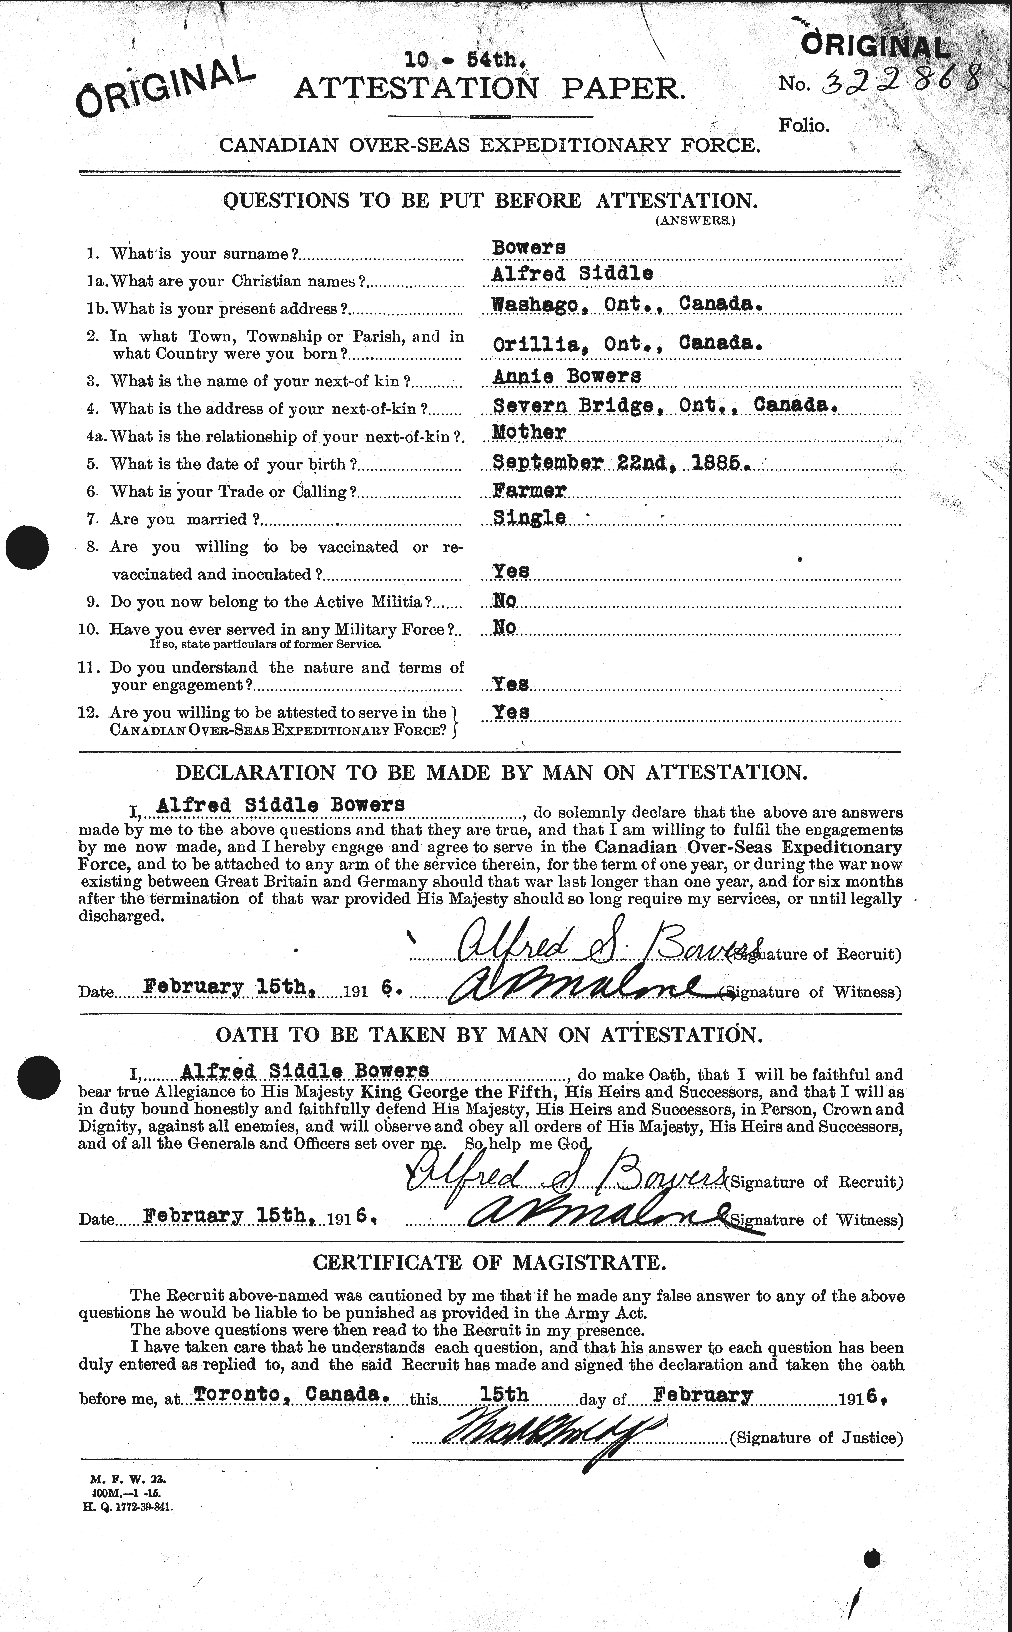 Personnel Records of the First World War - CEF 256815a